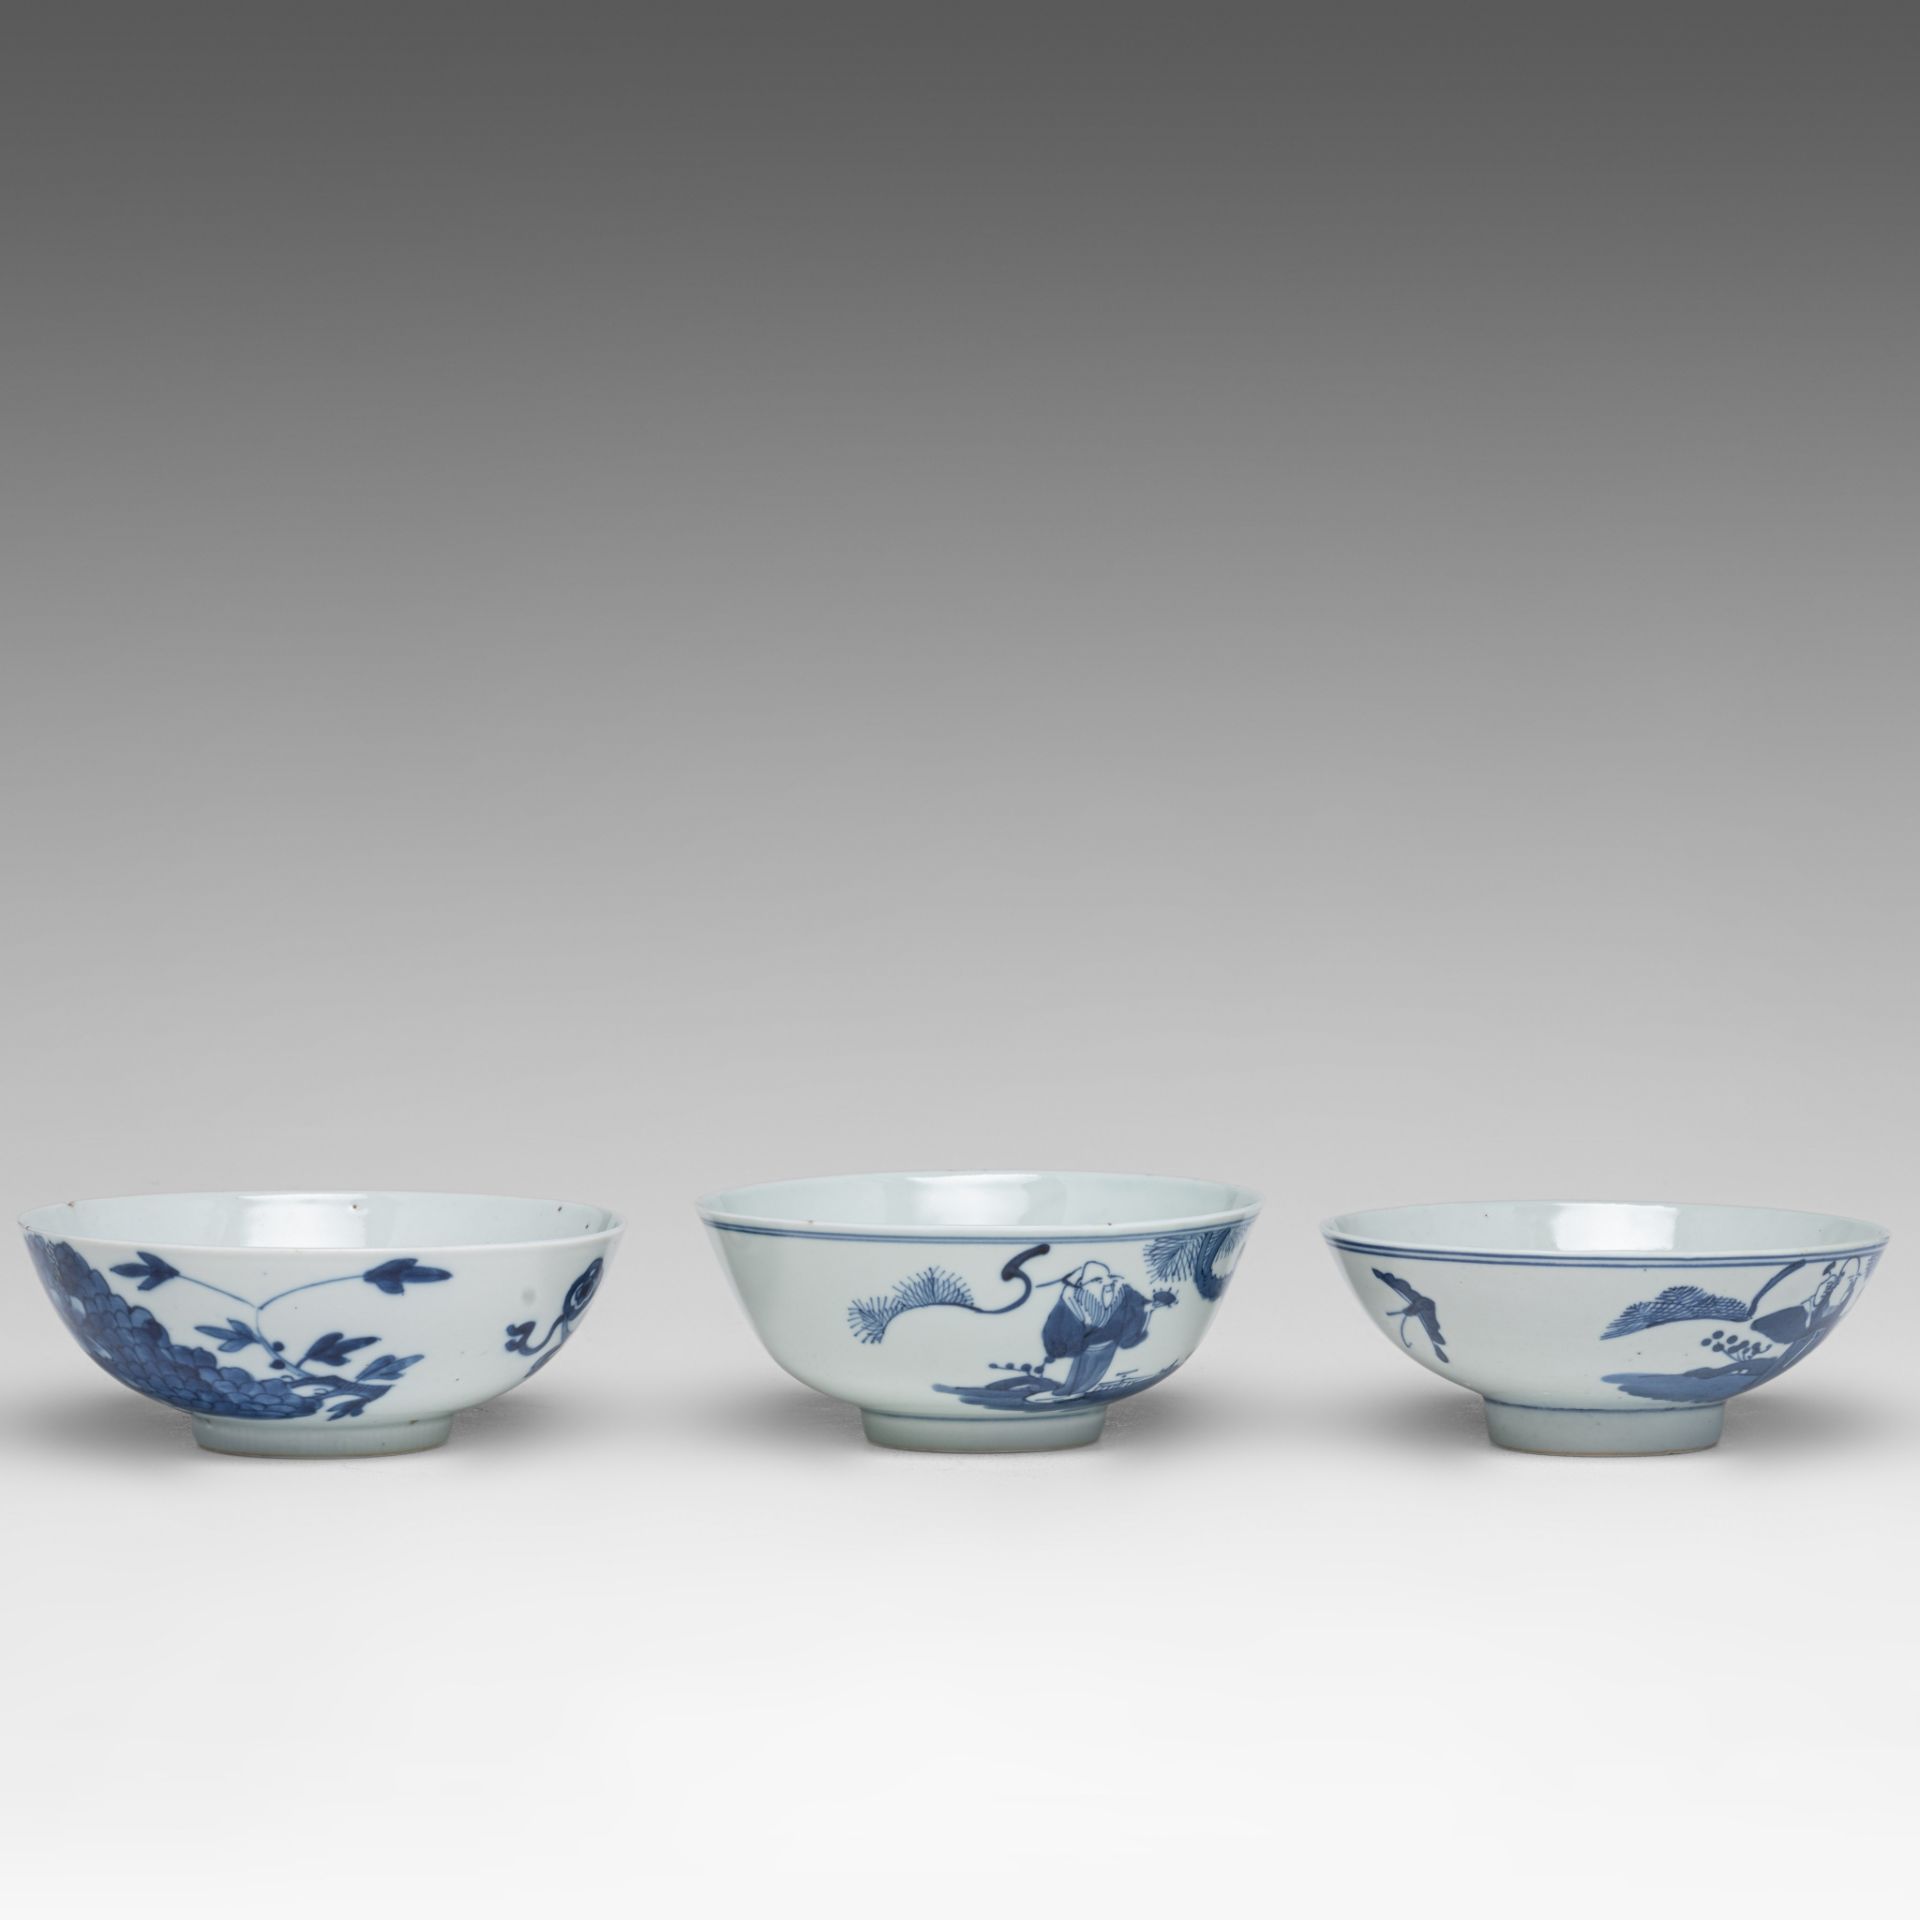 A collection of Chinese blue and white bowls and a pair of celadon vases, late 19thC/Republic period - Image 17 of 19